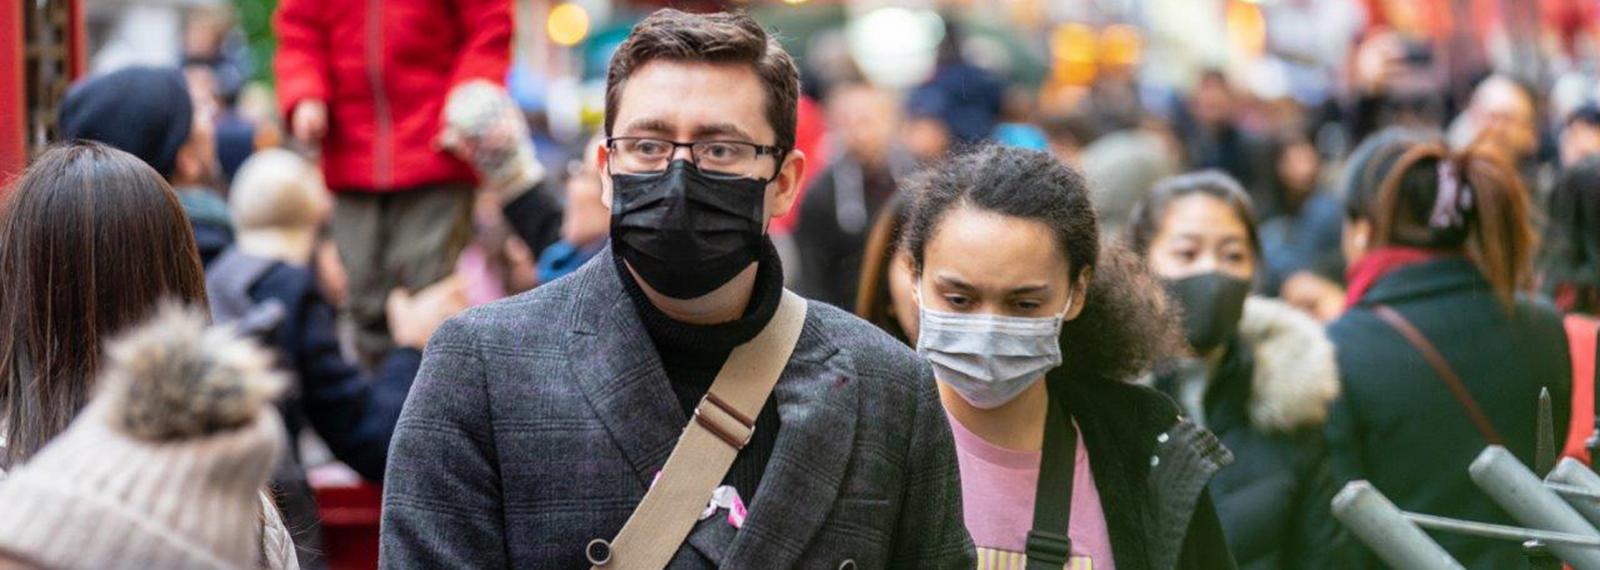 people wearing face masks in a crowded street